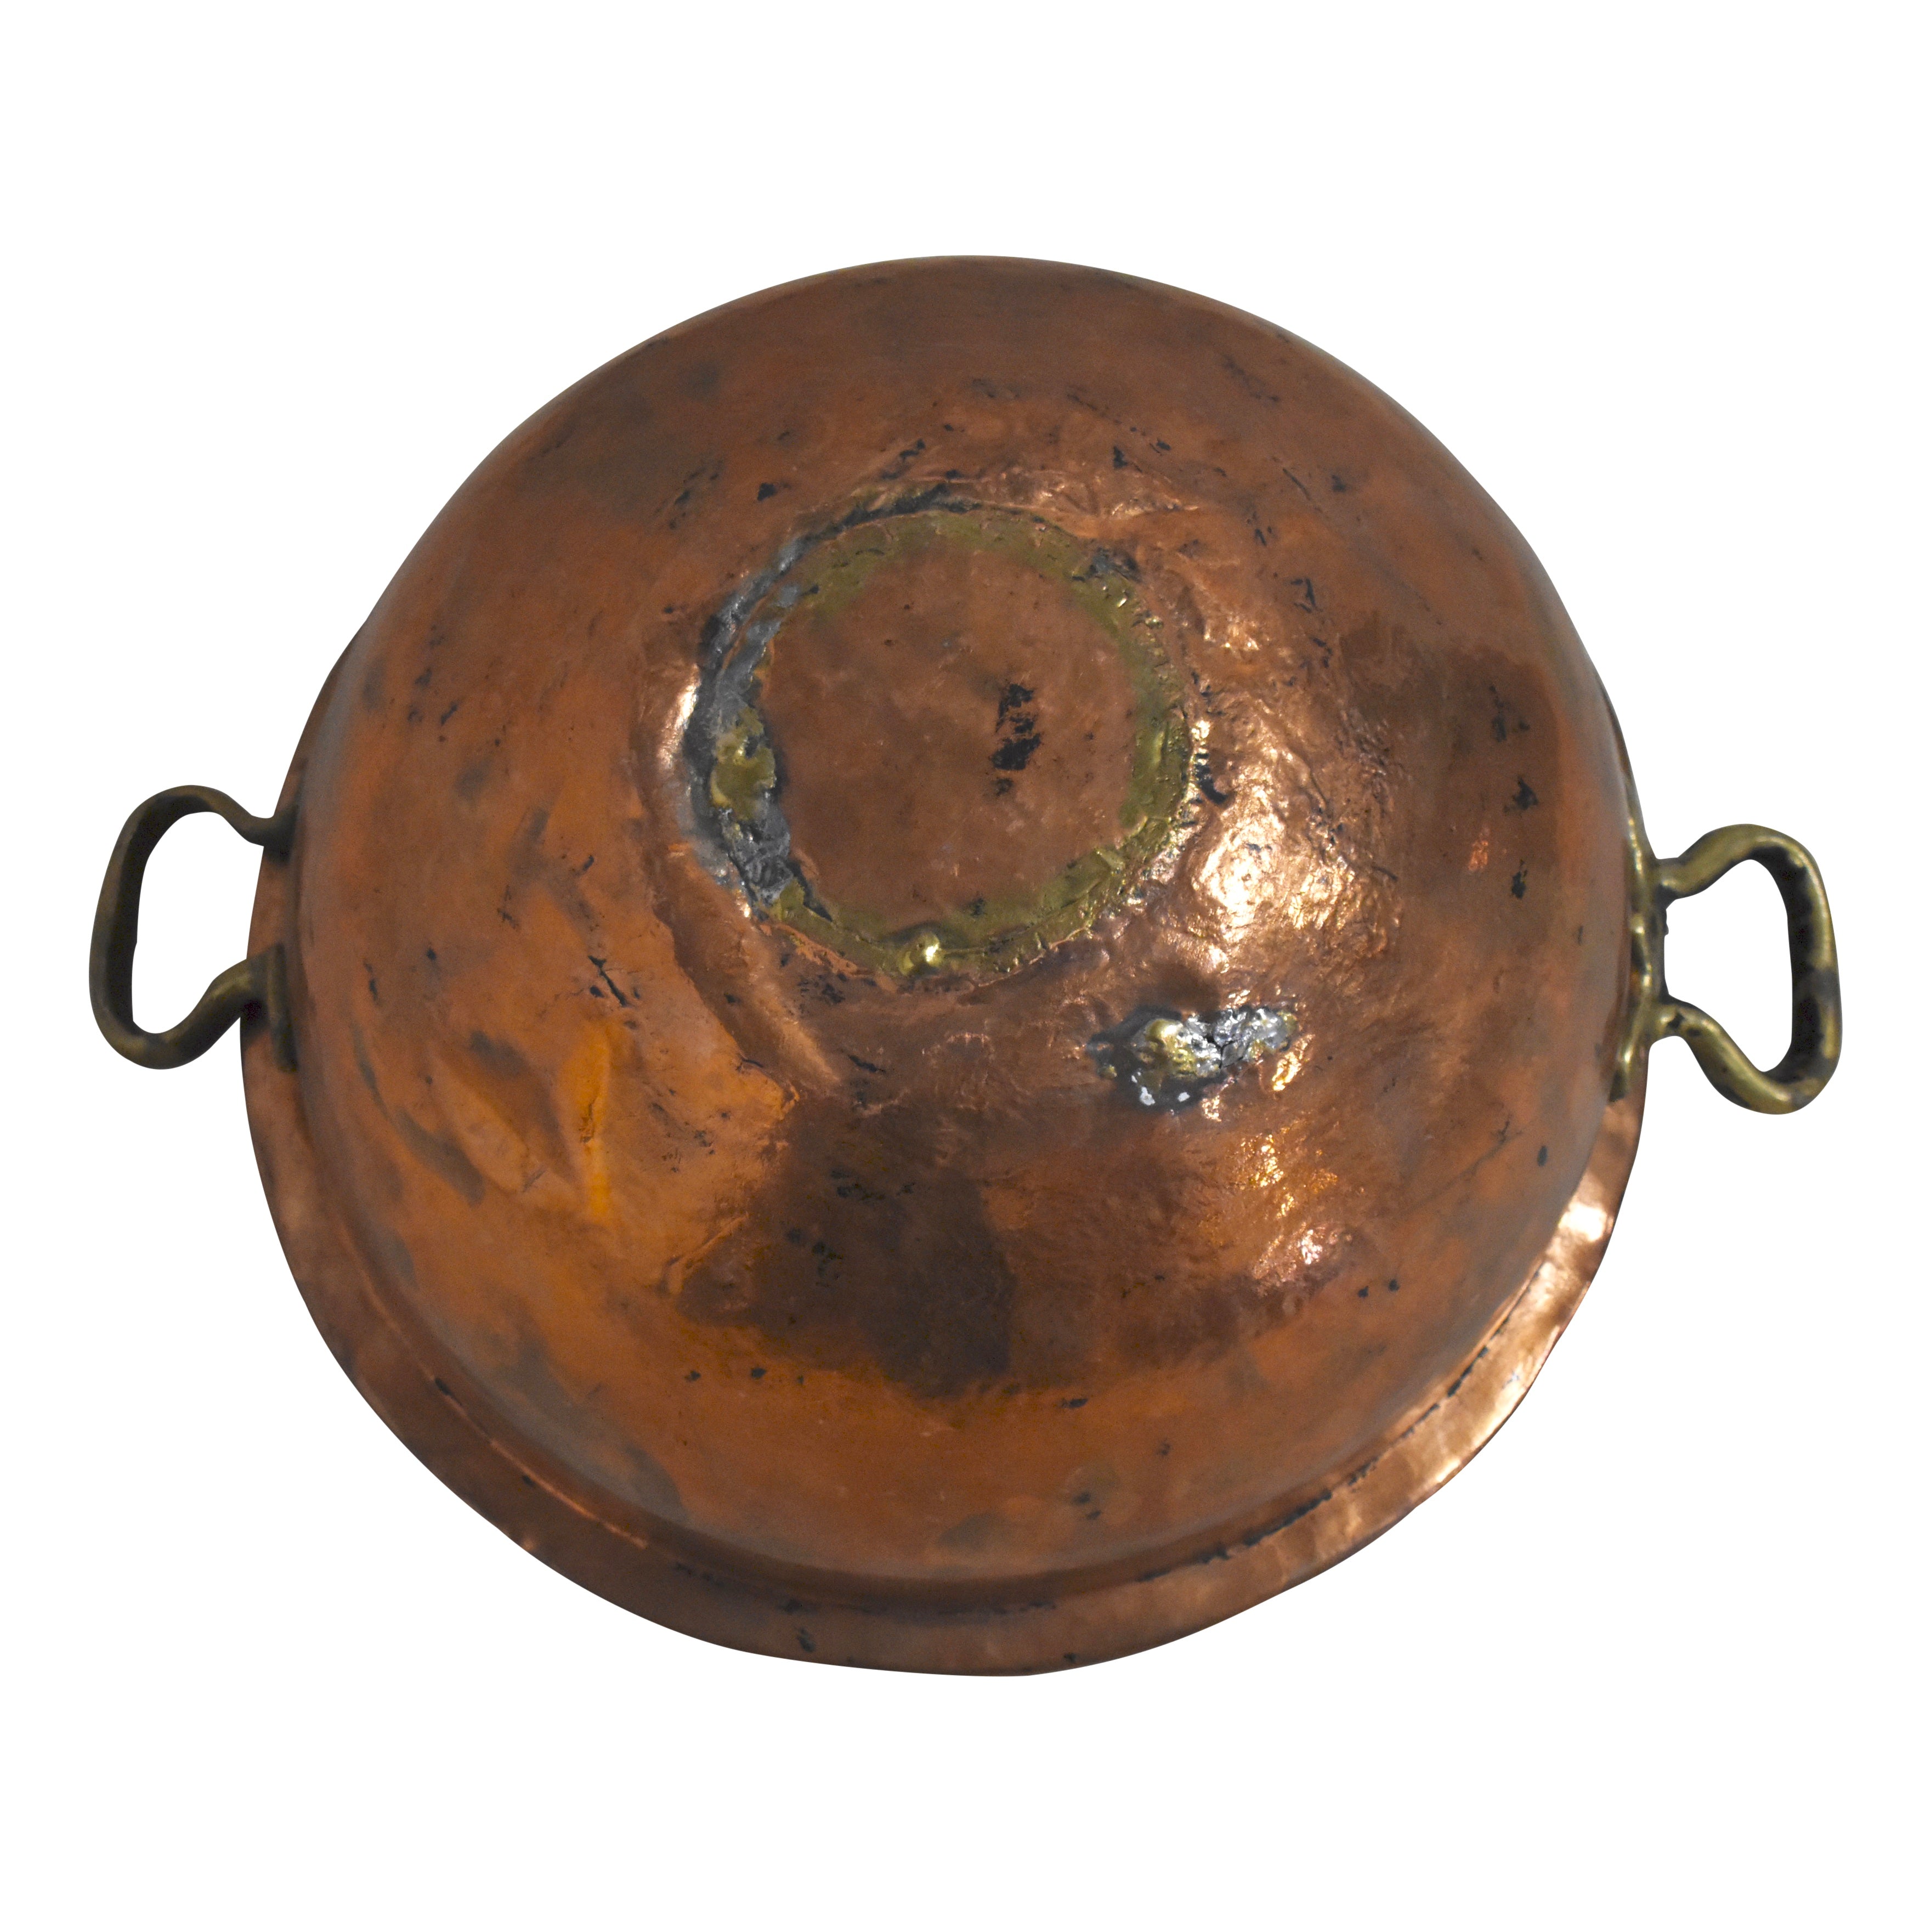 Copper Bowl with Brass Handles